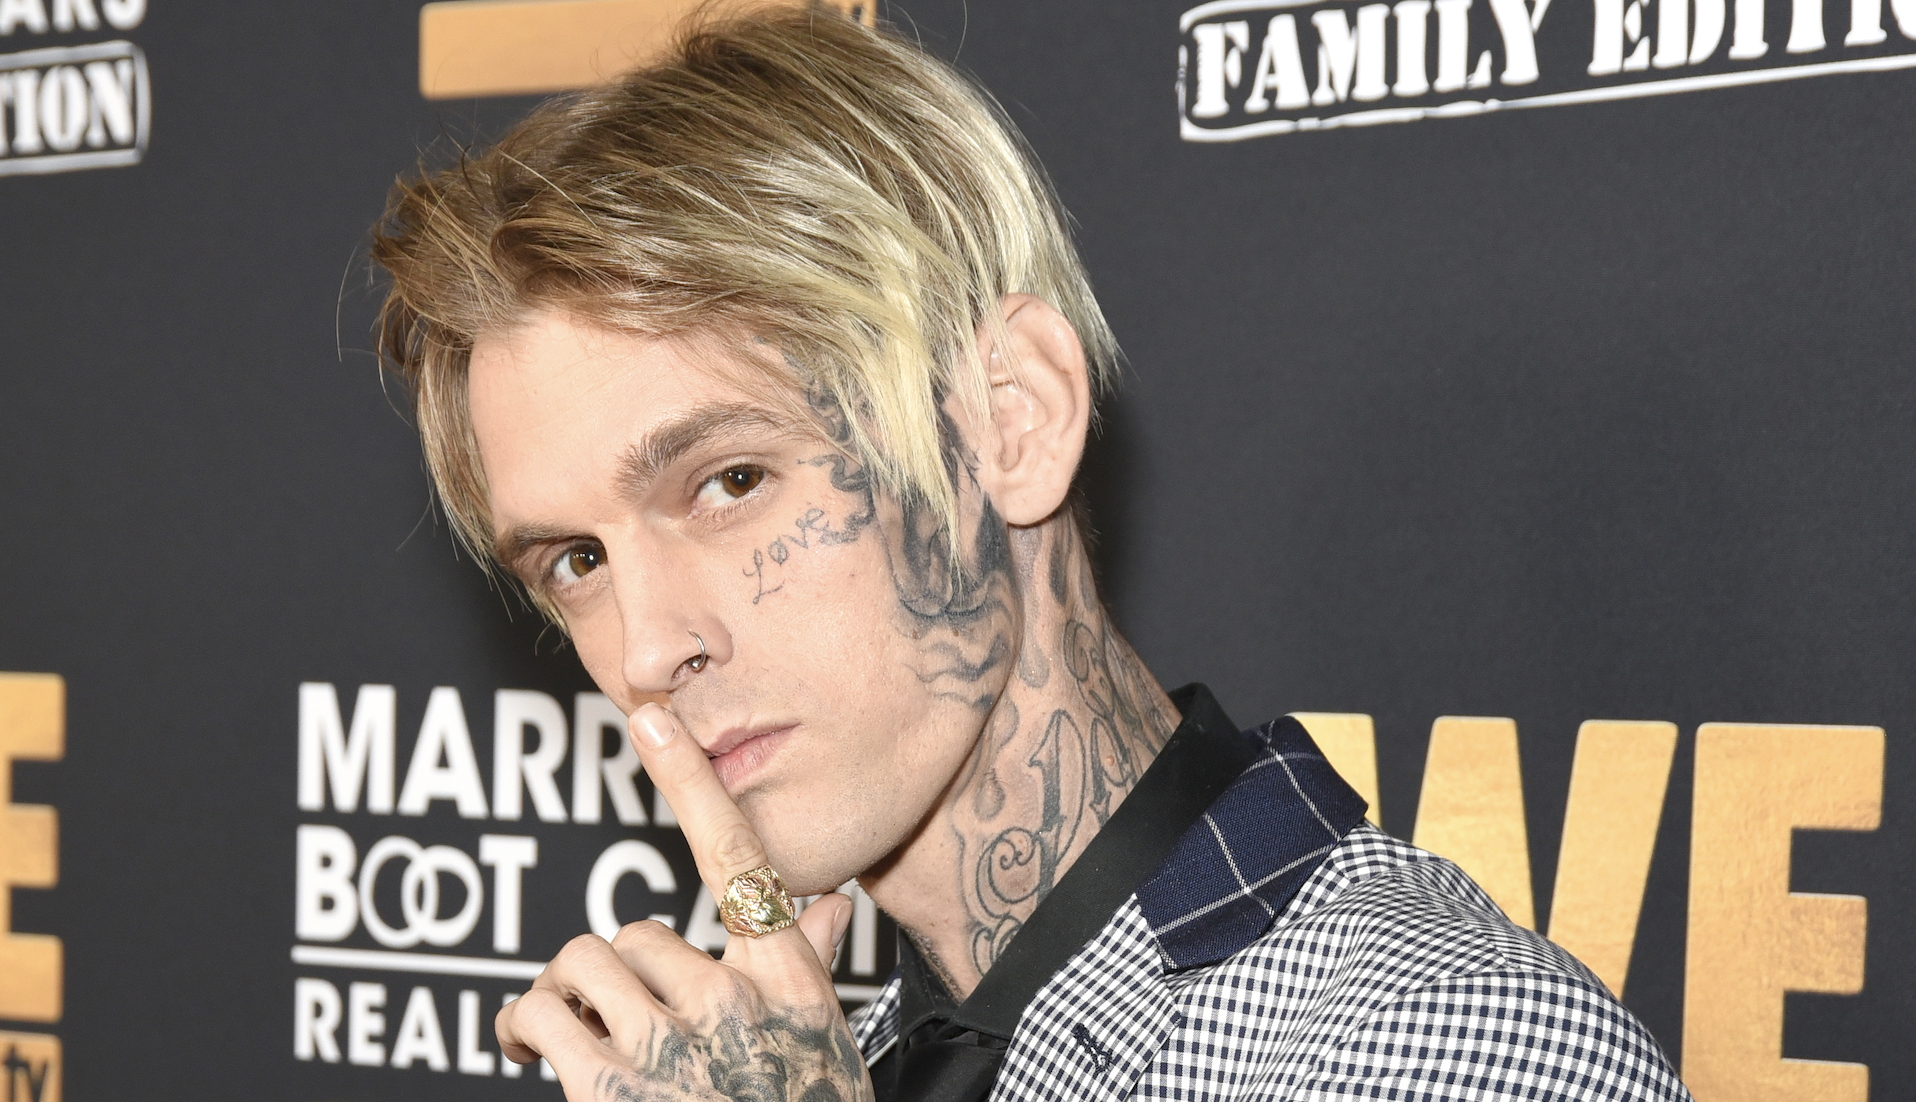 Official Cause Of Death For Singer Aaron Carter Is Released By Medical Examiners